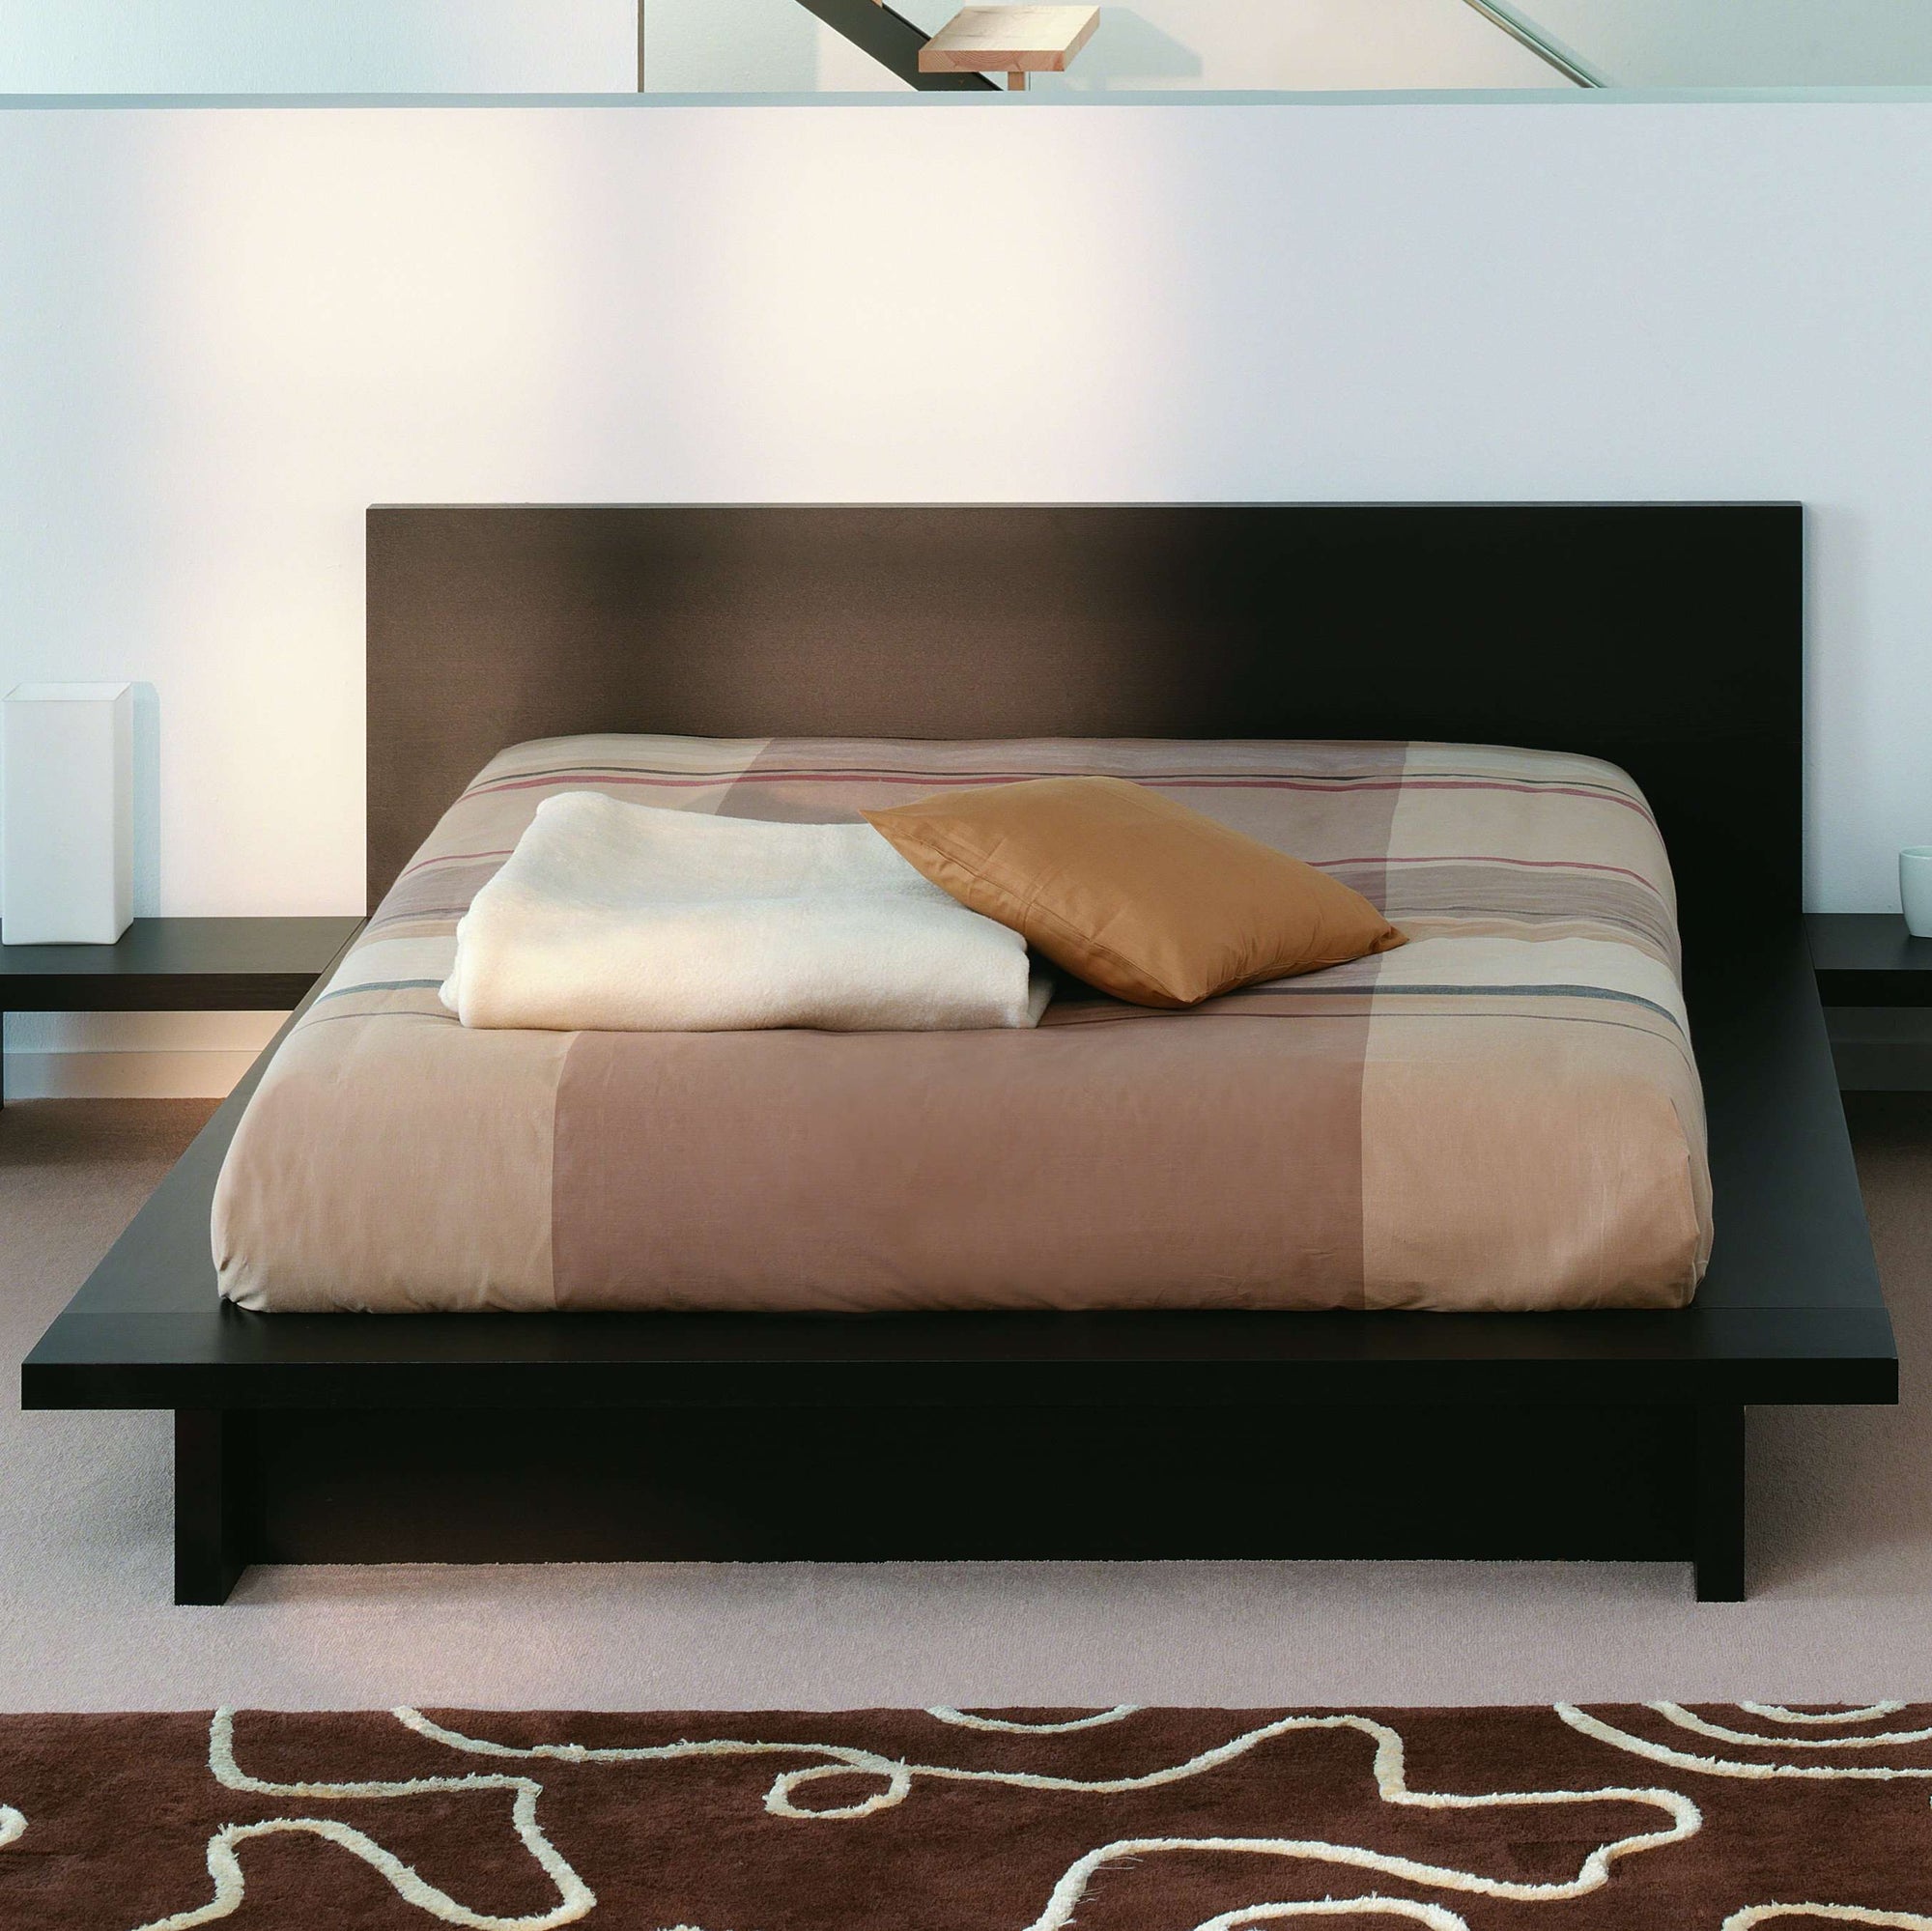 Tema Home-Sono Bed Queen Size + Mattress Support + 2 Night Stands 030017-SONONS2-Bedroom Set-MODTEMPO